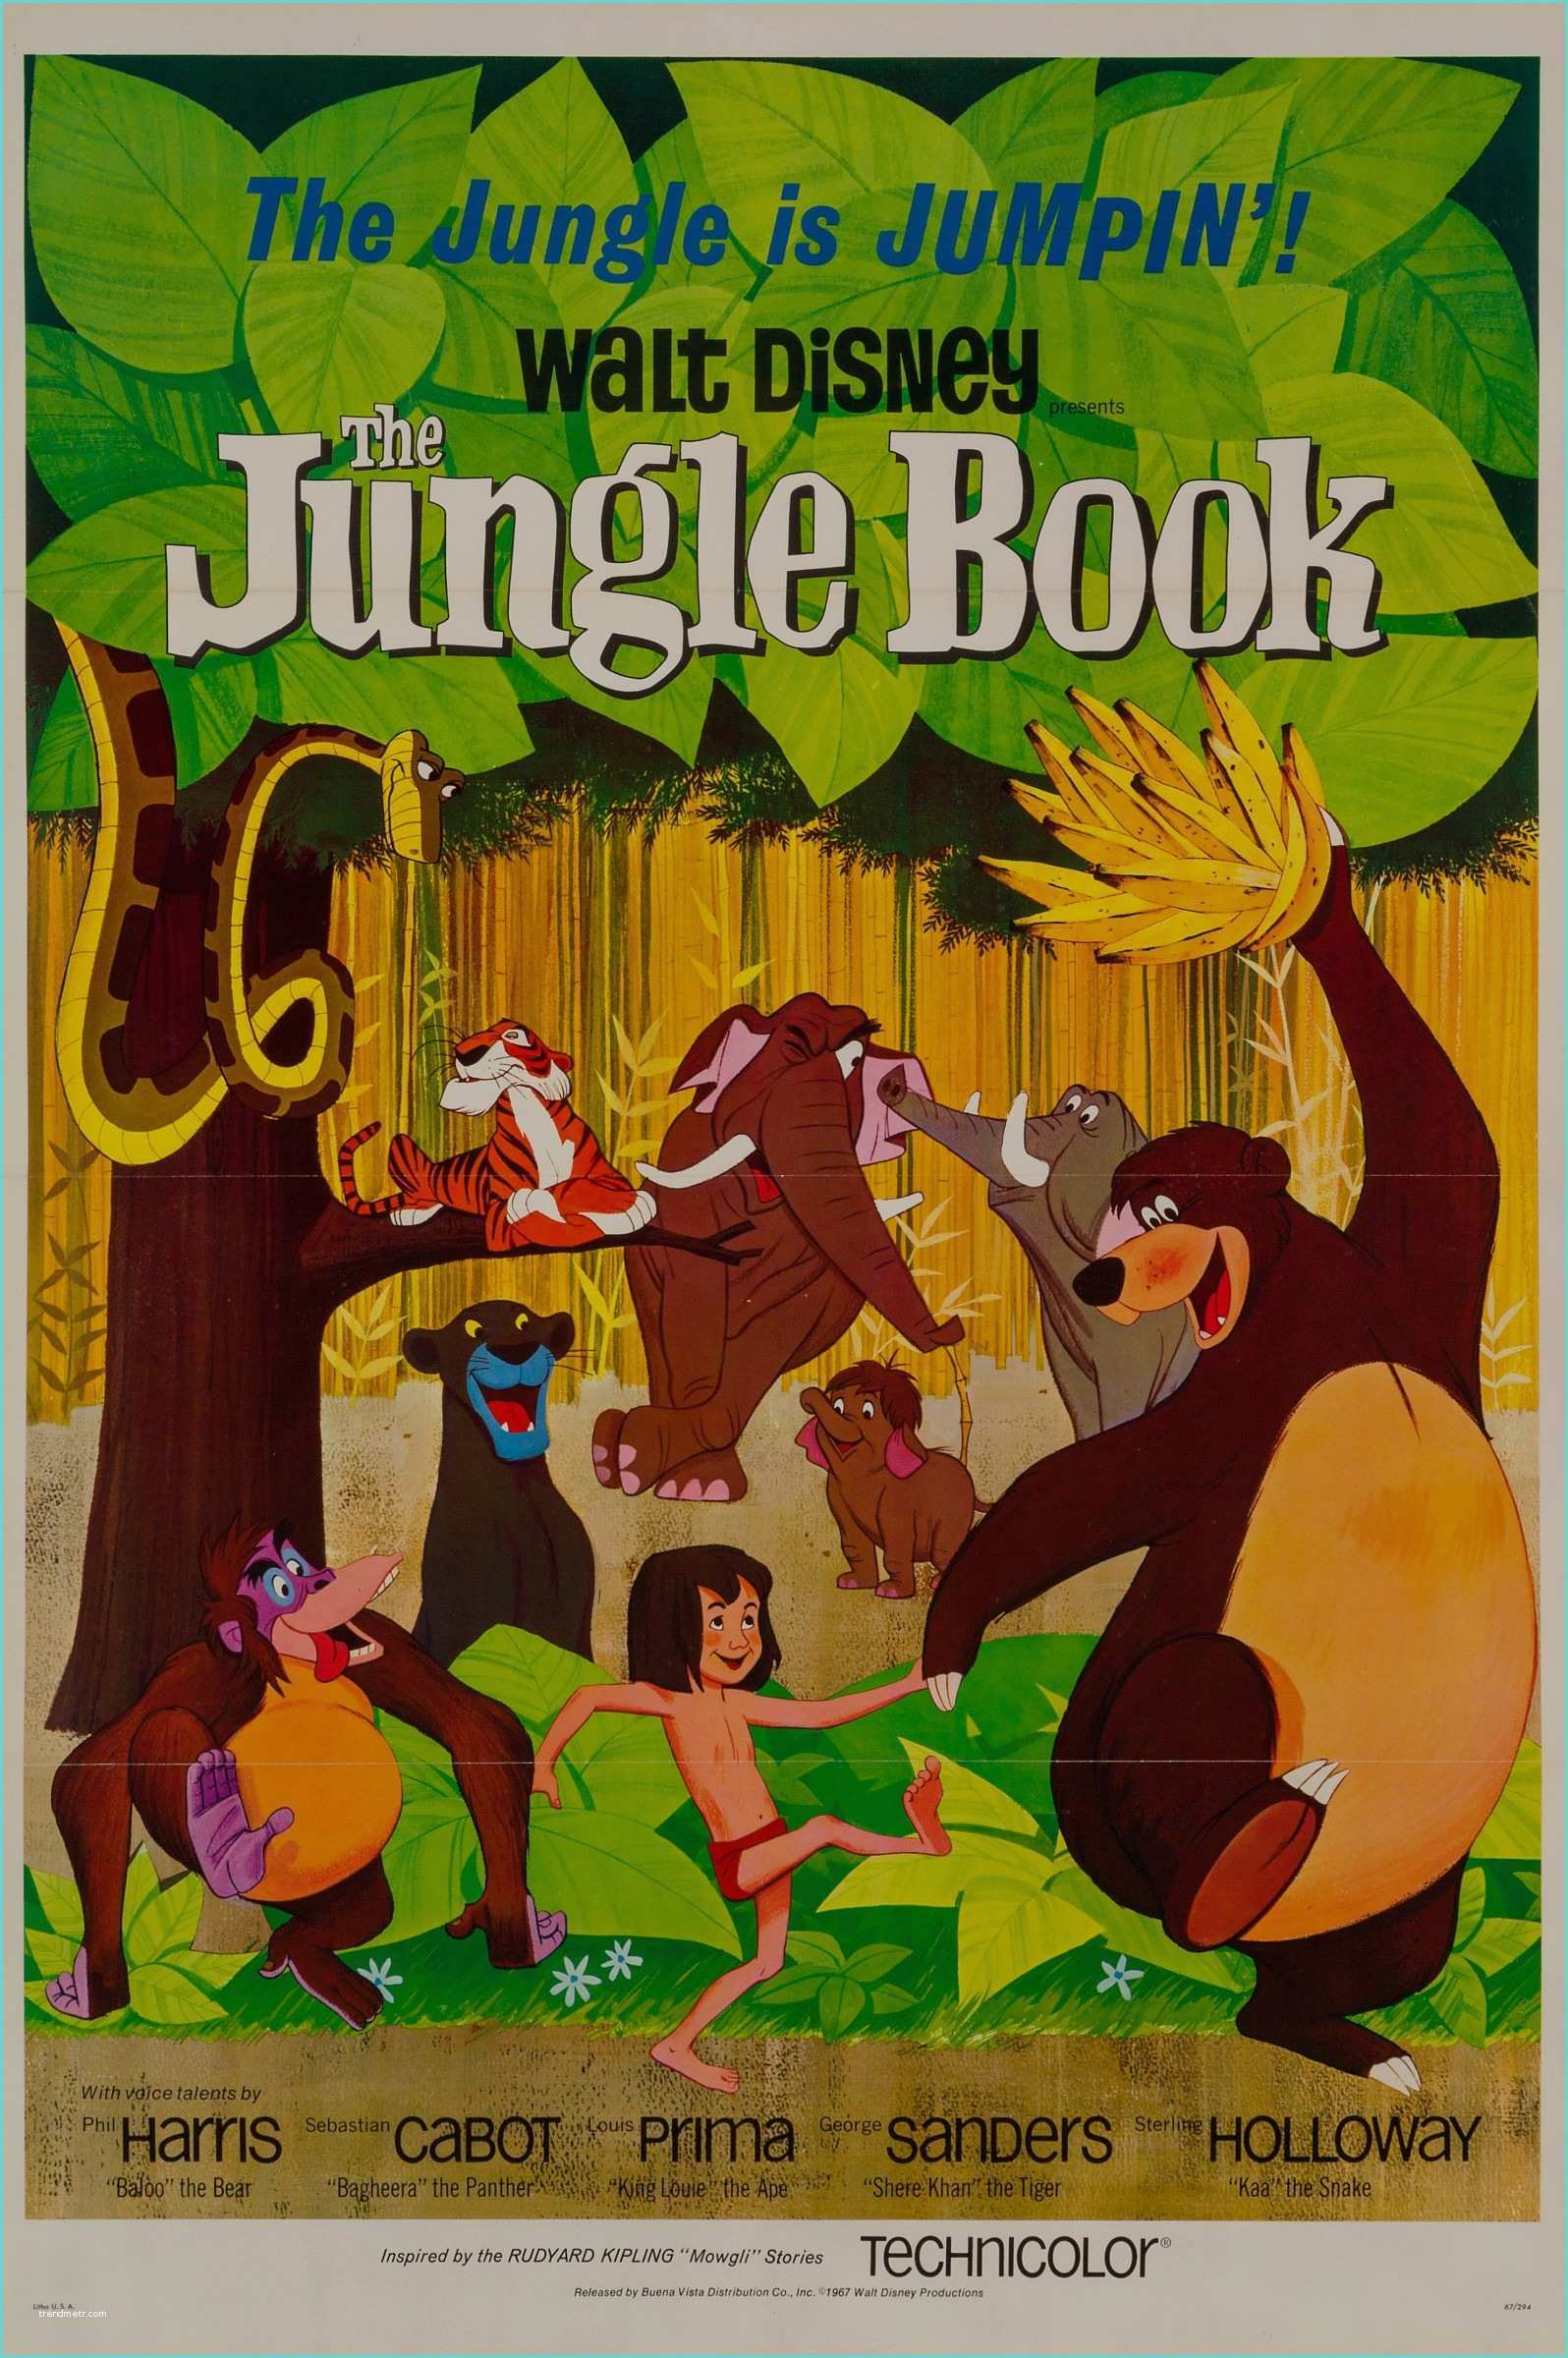 Allposters Return Policy the Jungle Book 1967